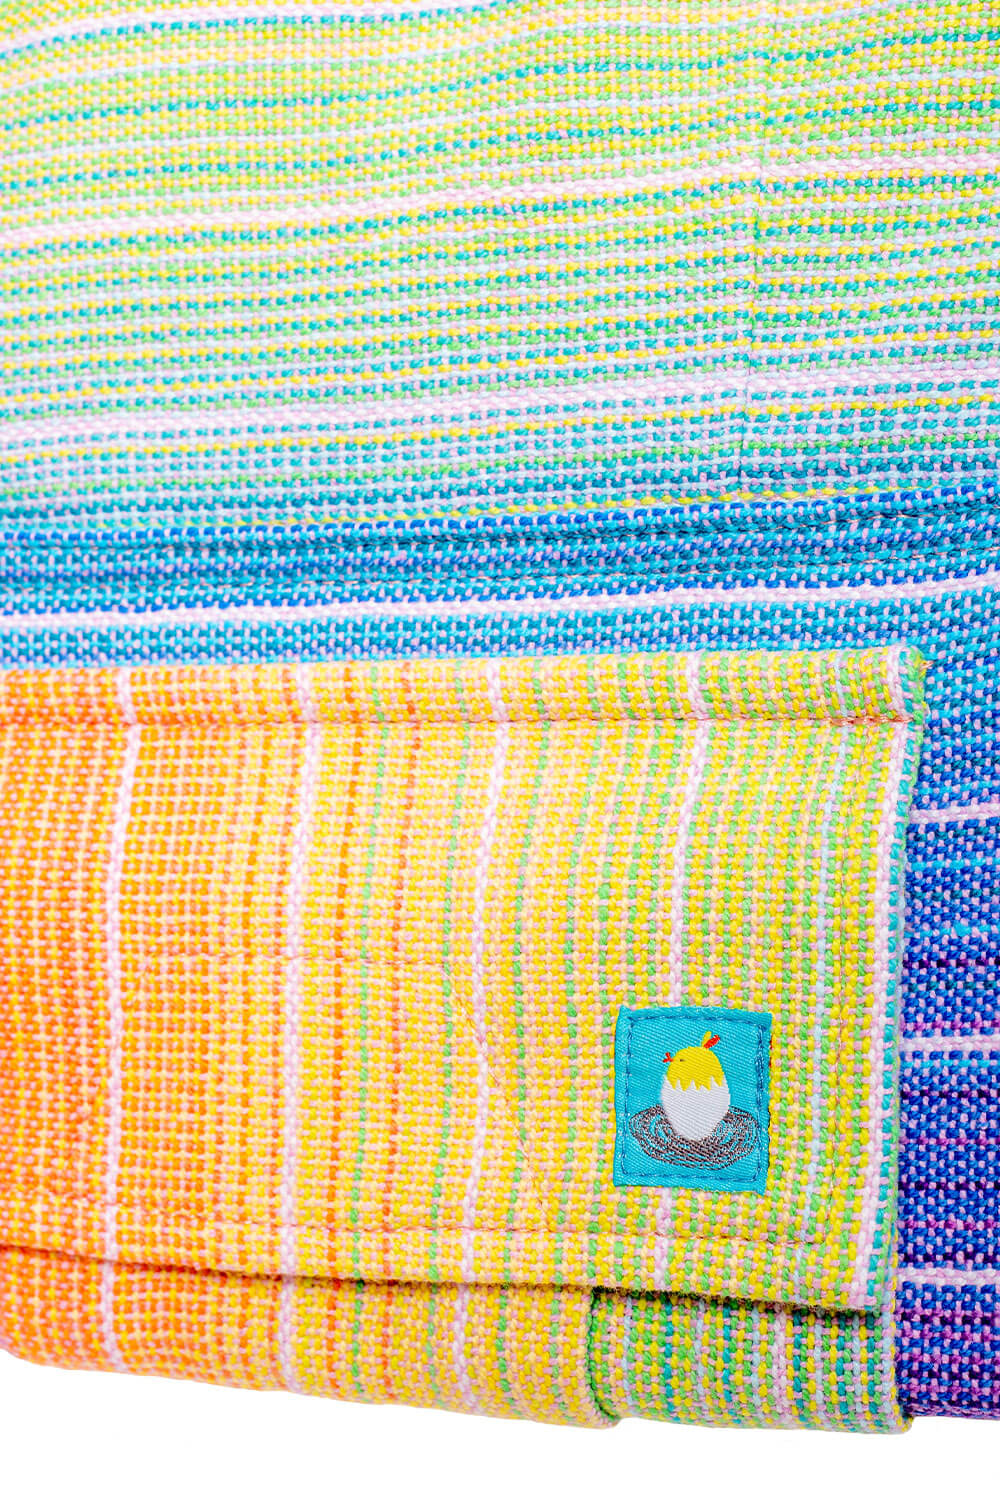 Bright - Signature Handwoven Standard Baby Carrier